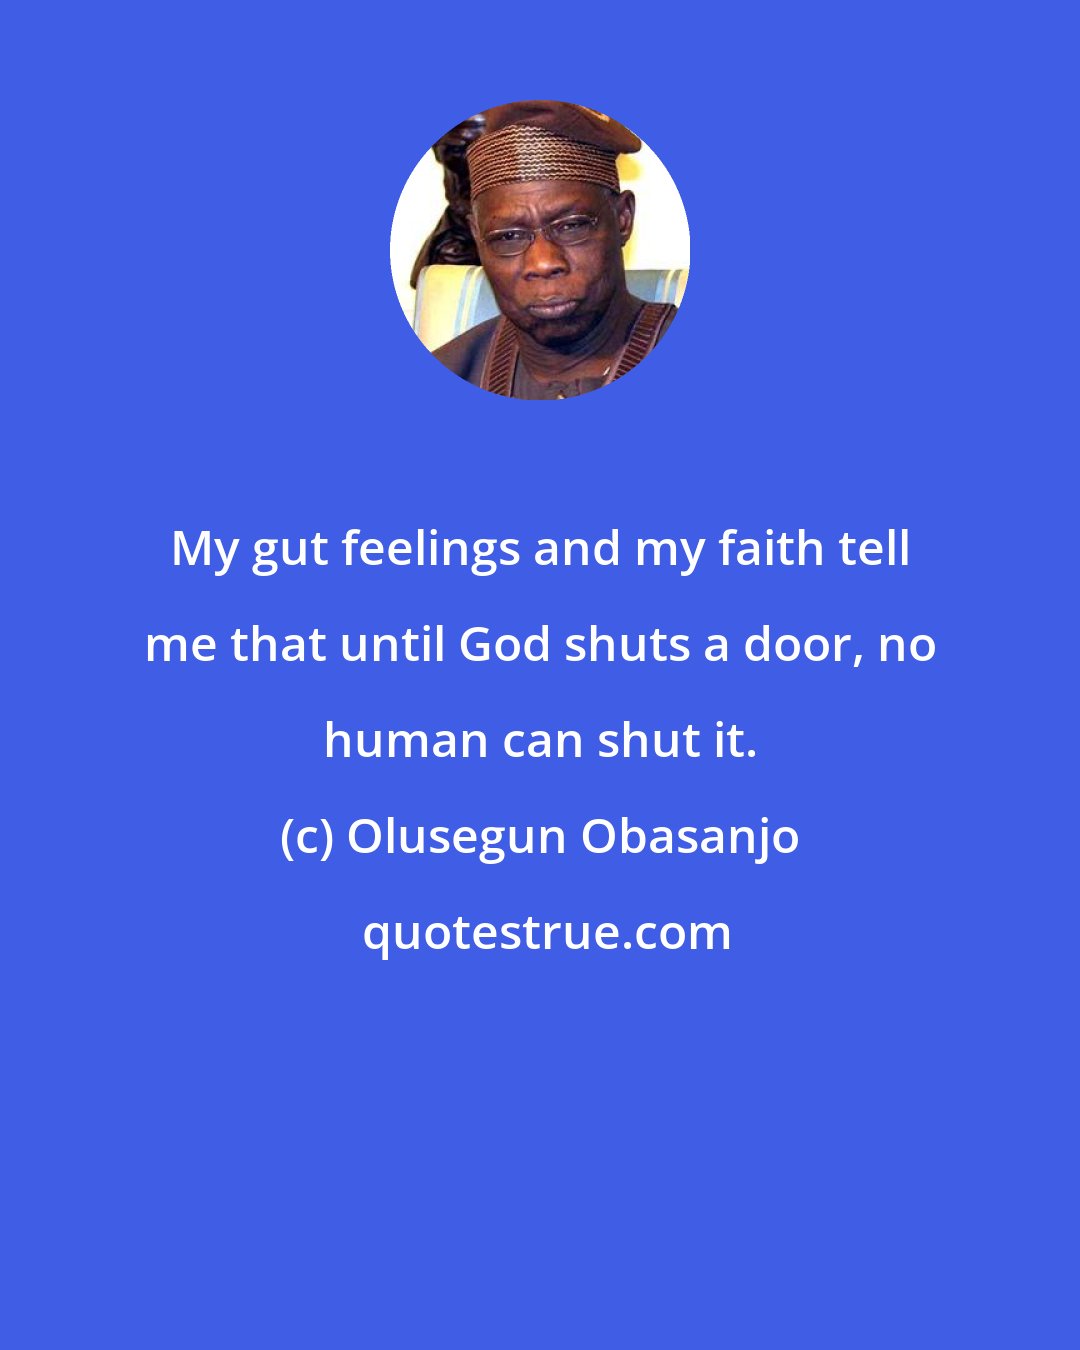 Olusegun Obasanjo: My gut feelings and my faith tell me that until God shuts a door, no human can shut it.